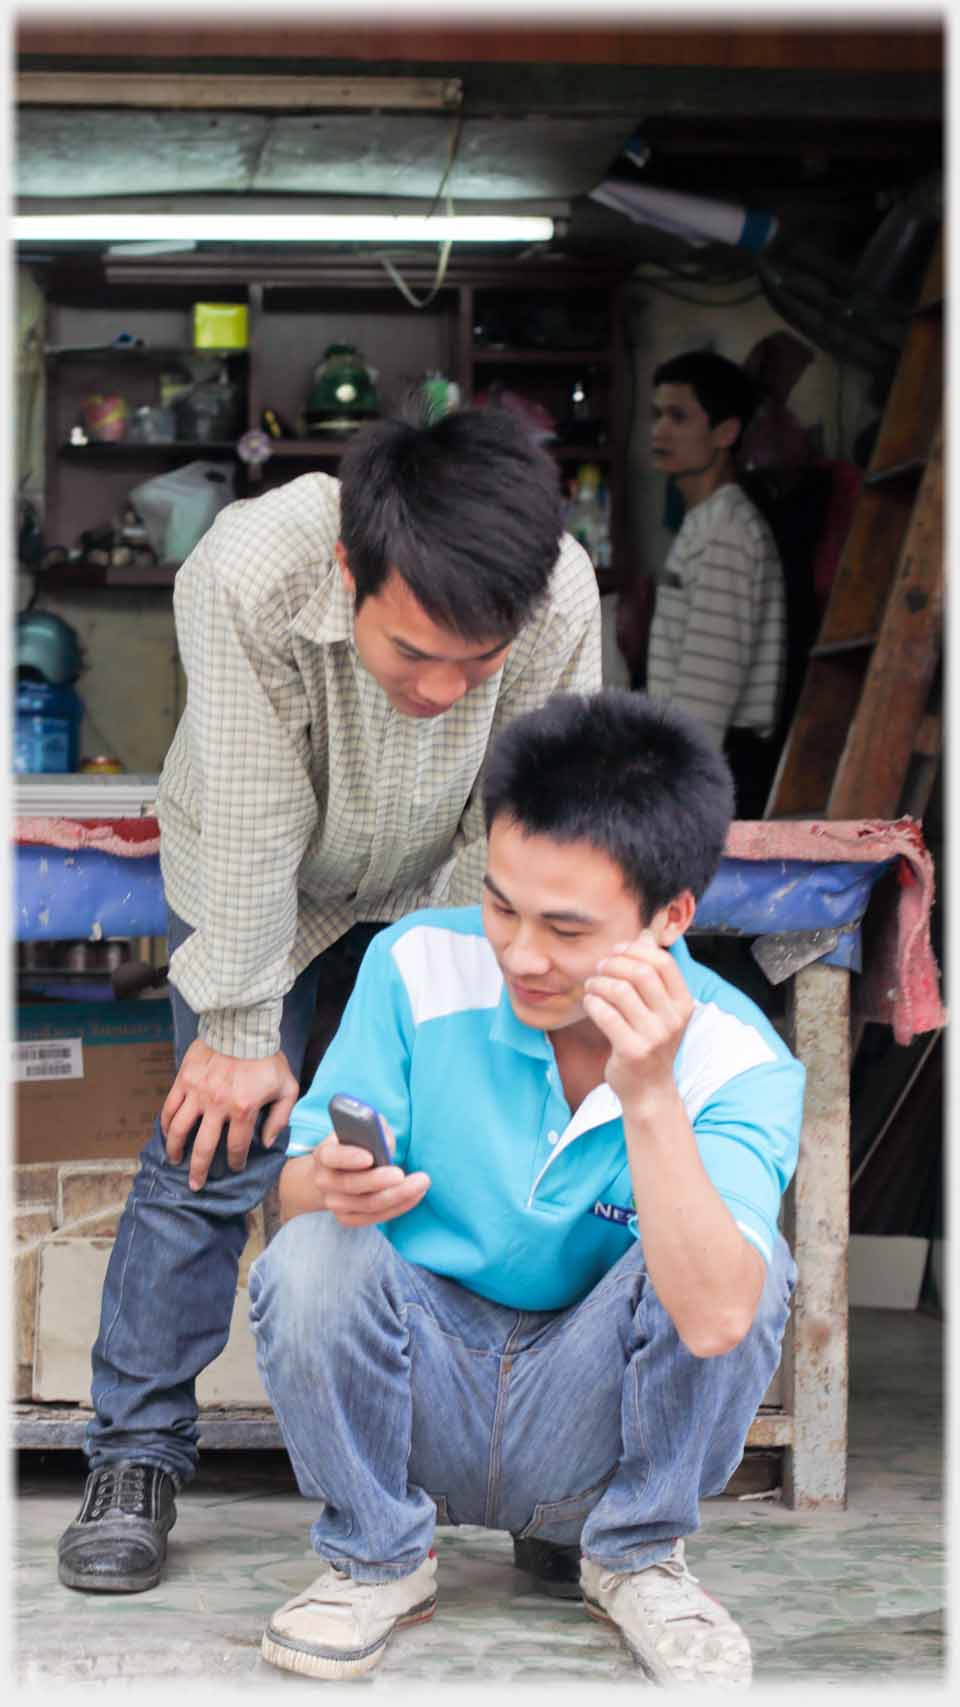 Man squatting with phone, another looks over his shoulder.